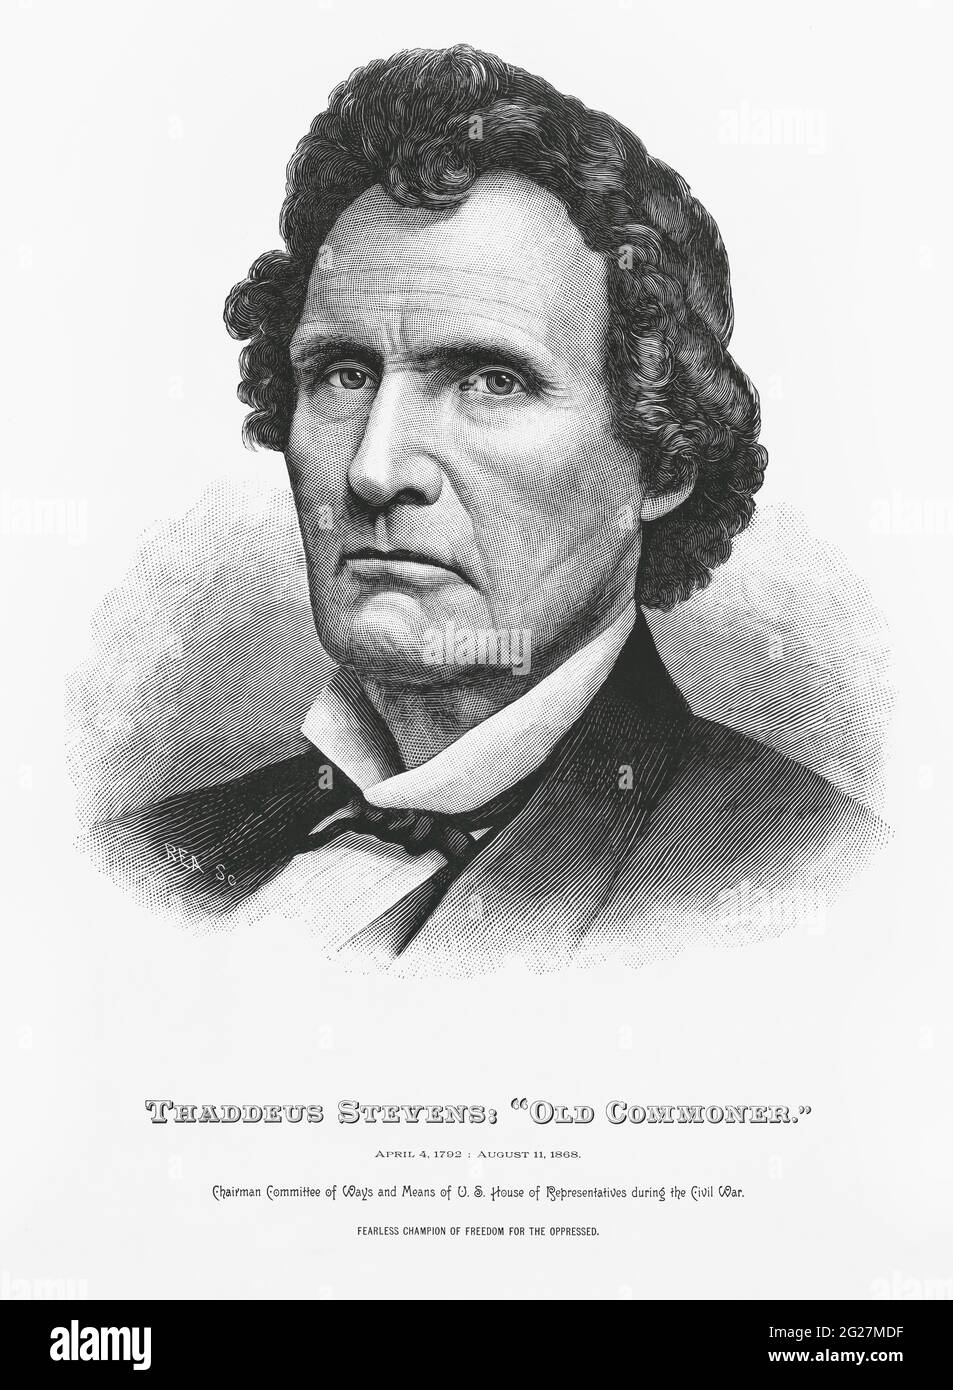 Thaddeus Stevens, a Radical Republican leader in the U.S. House of Representatives during the 1860's. Stock Photo